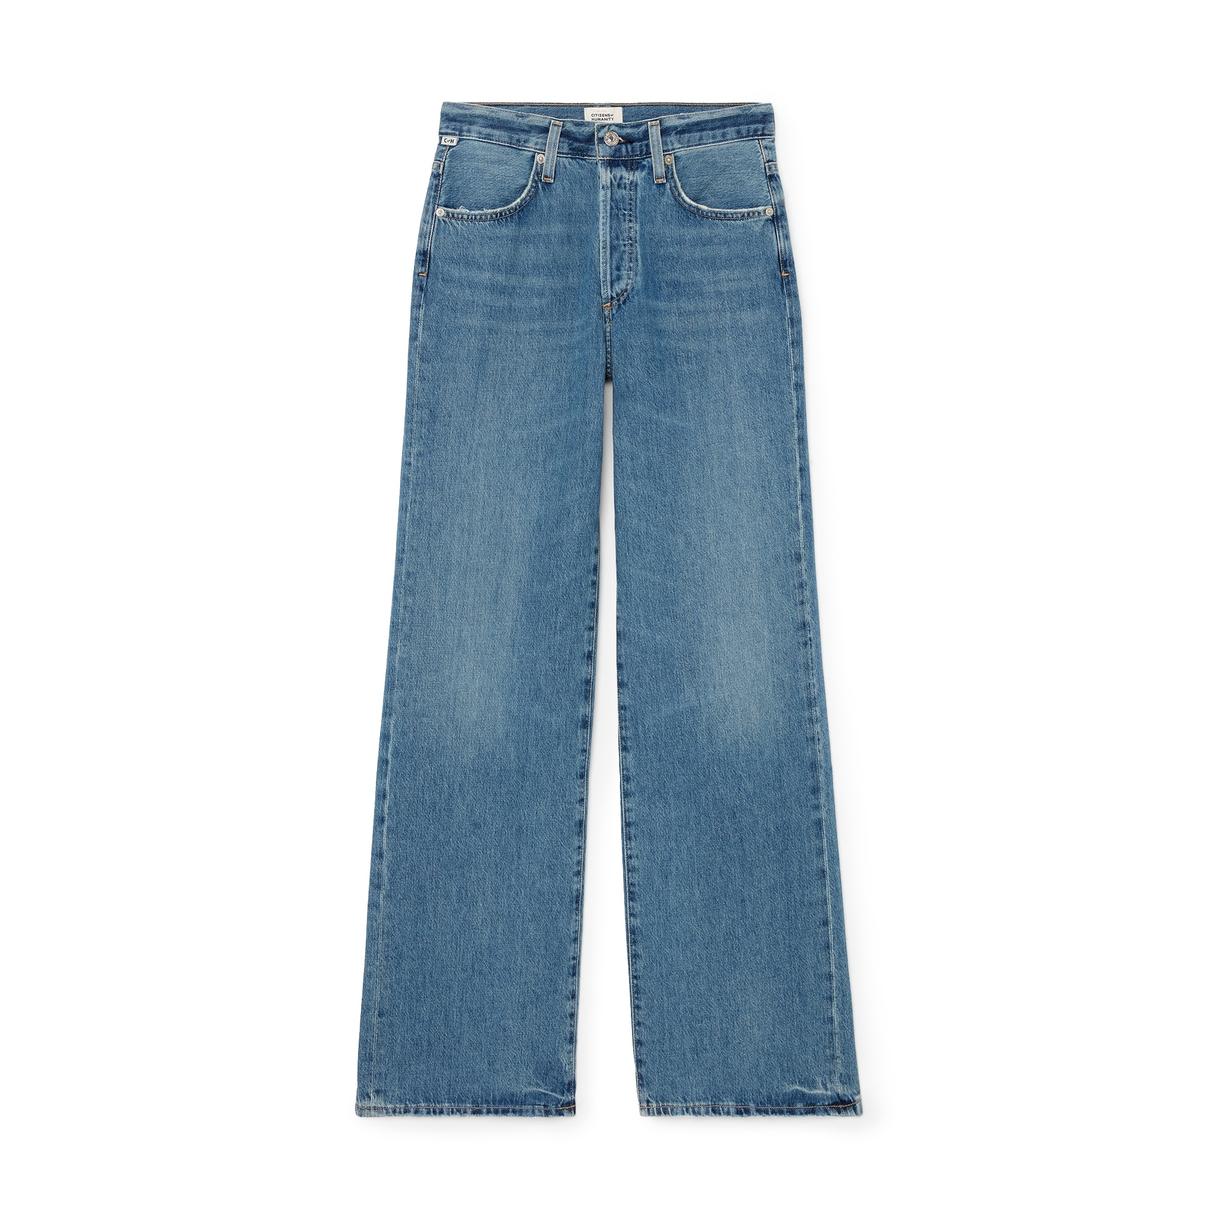 Citizens of Humanity Annina Long Trouser Jeans